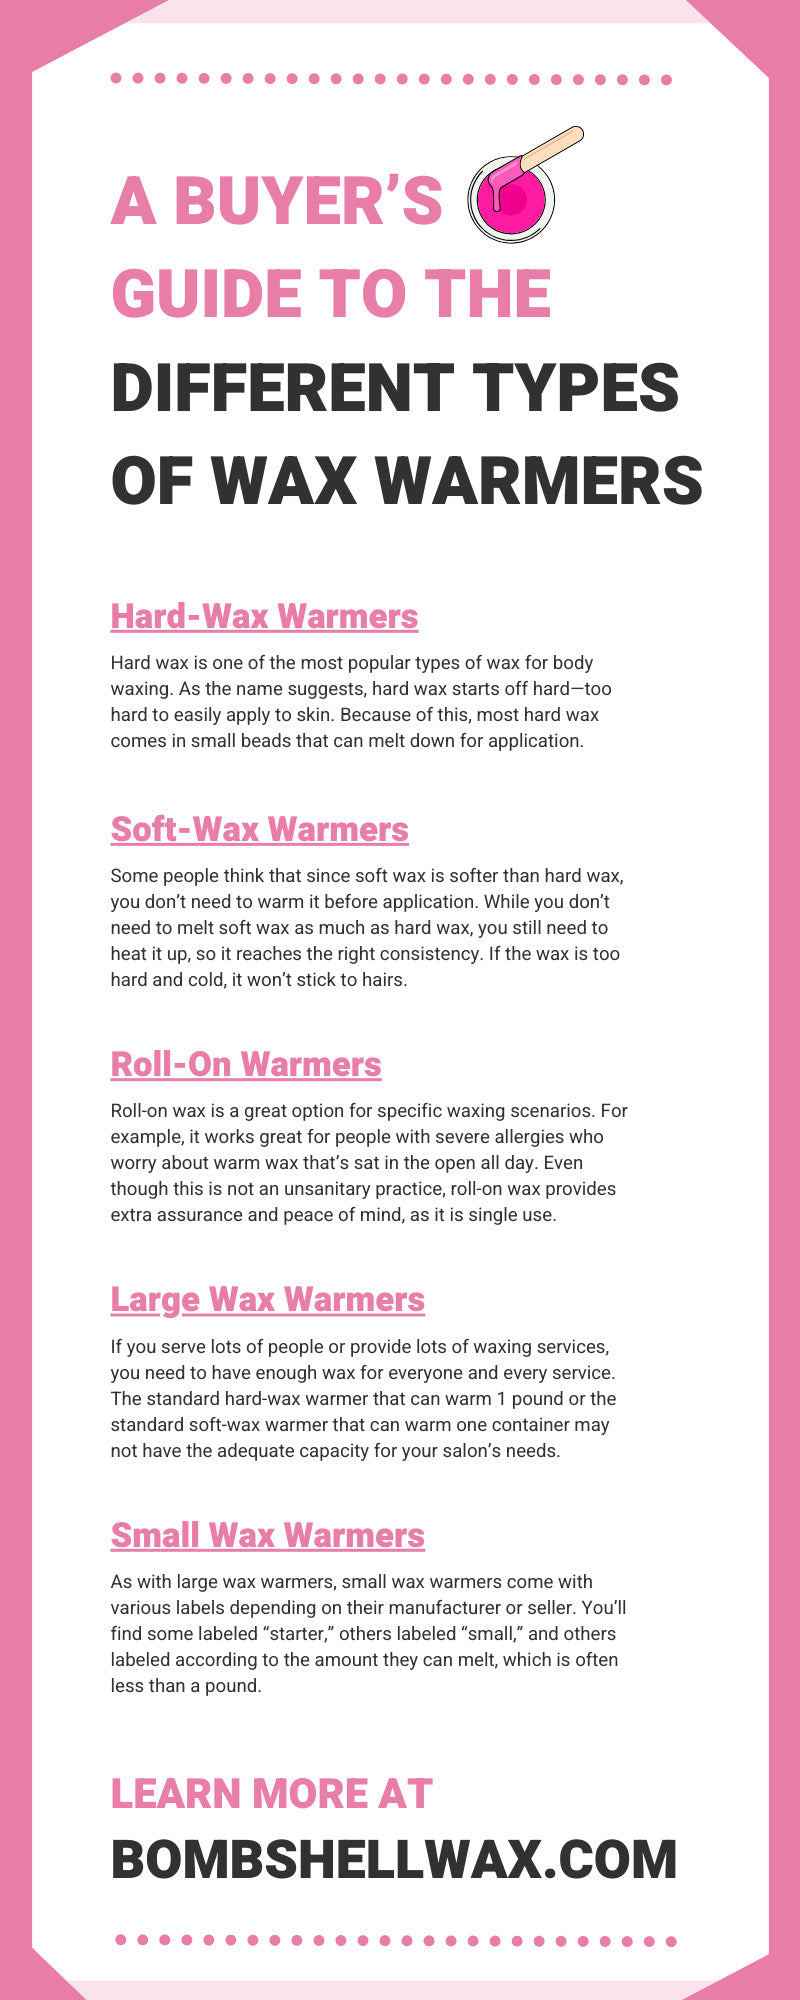 A Buyer’s Guide to the Different Types of Wax Warmers